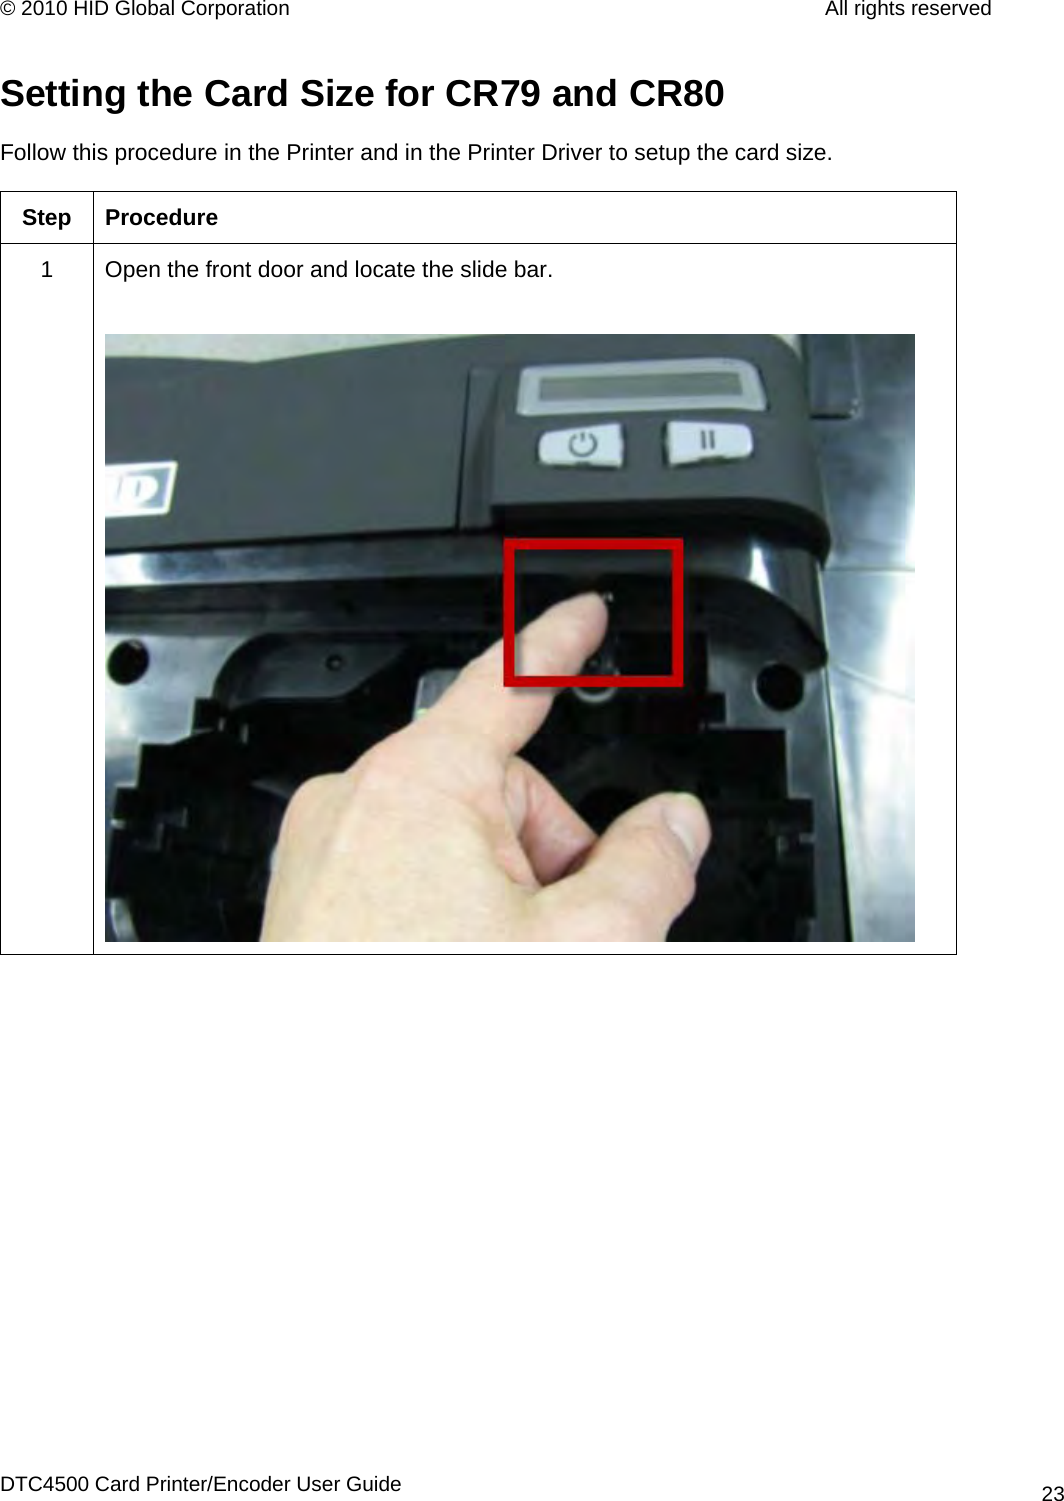 © 2010 HID Global Corporation         All rights reserved  Setting the Card Size for CR79 and CR80 Follow this procedure in the Printer and in the Printer Driver to setup the card size.  Step Procedure 1  Open the front door and locate the slide bar.   DTC4500 Card Printer/Encoder User Guide 23